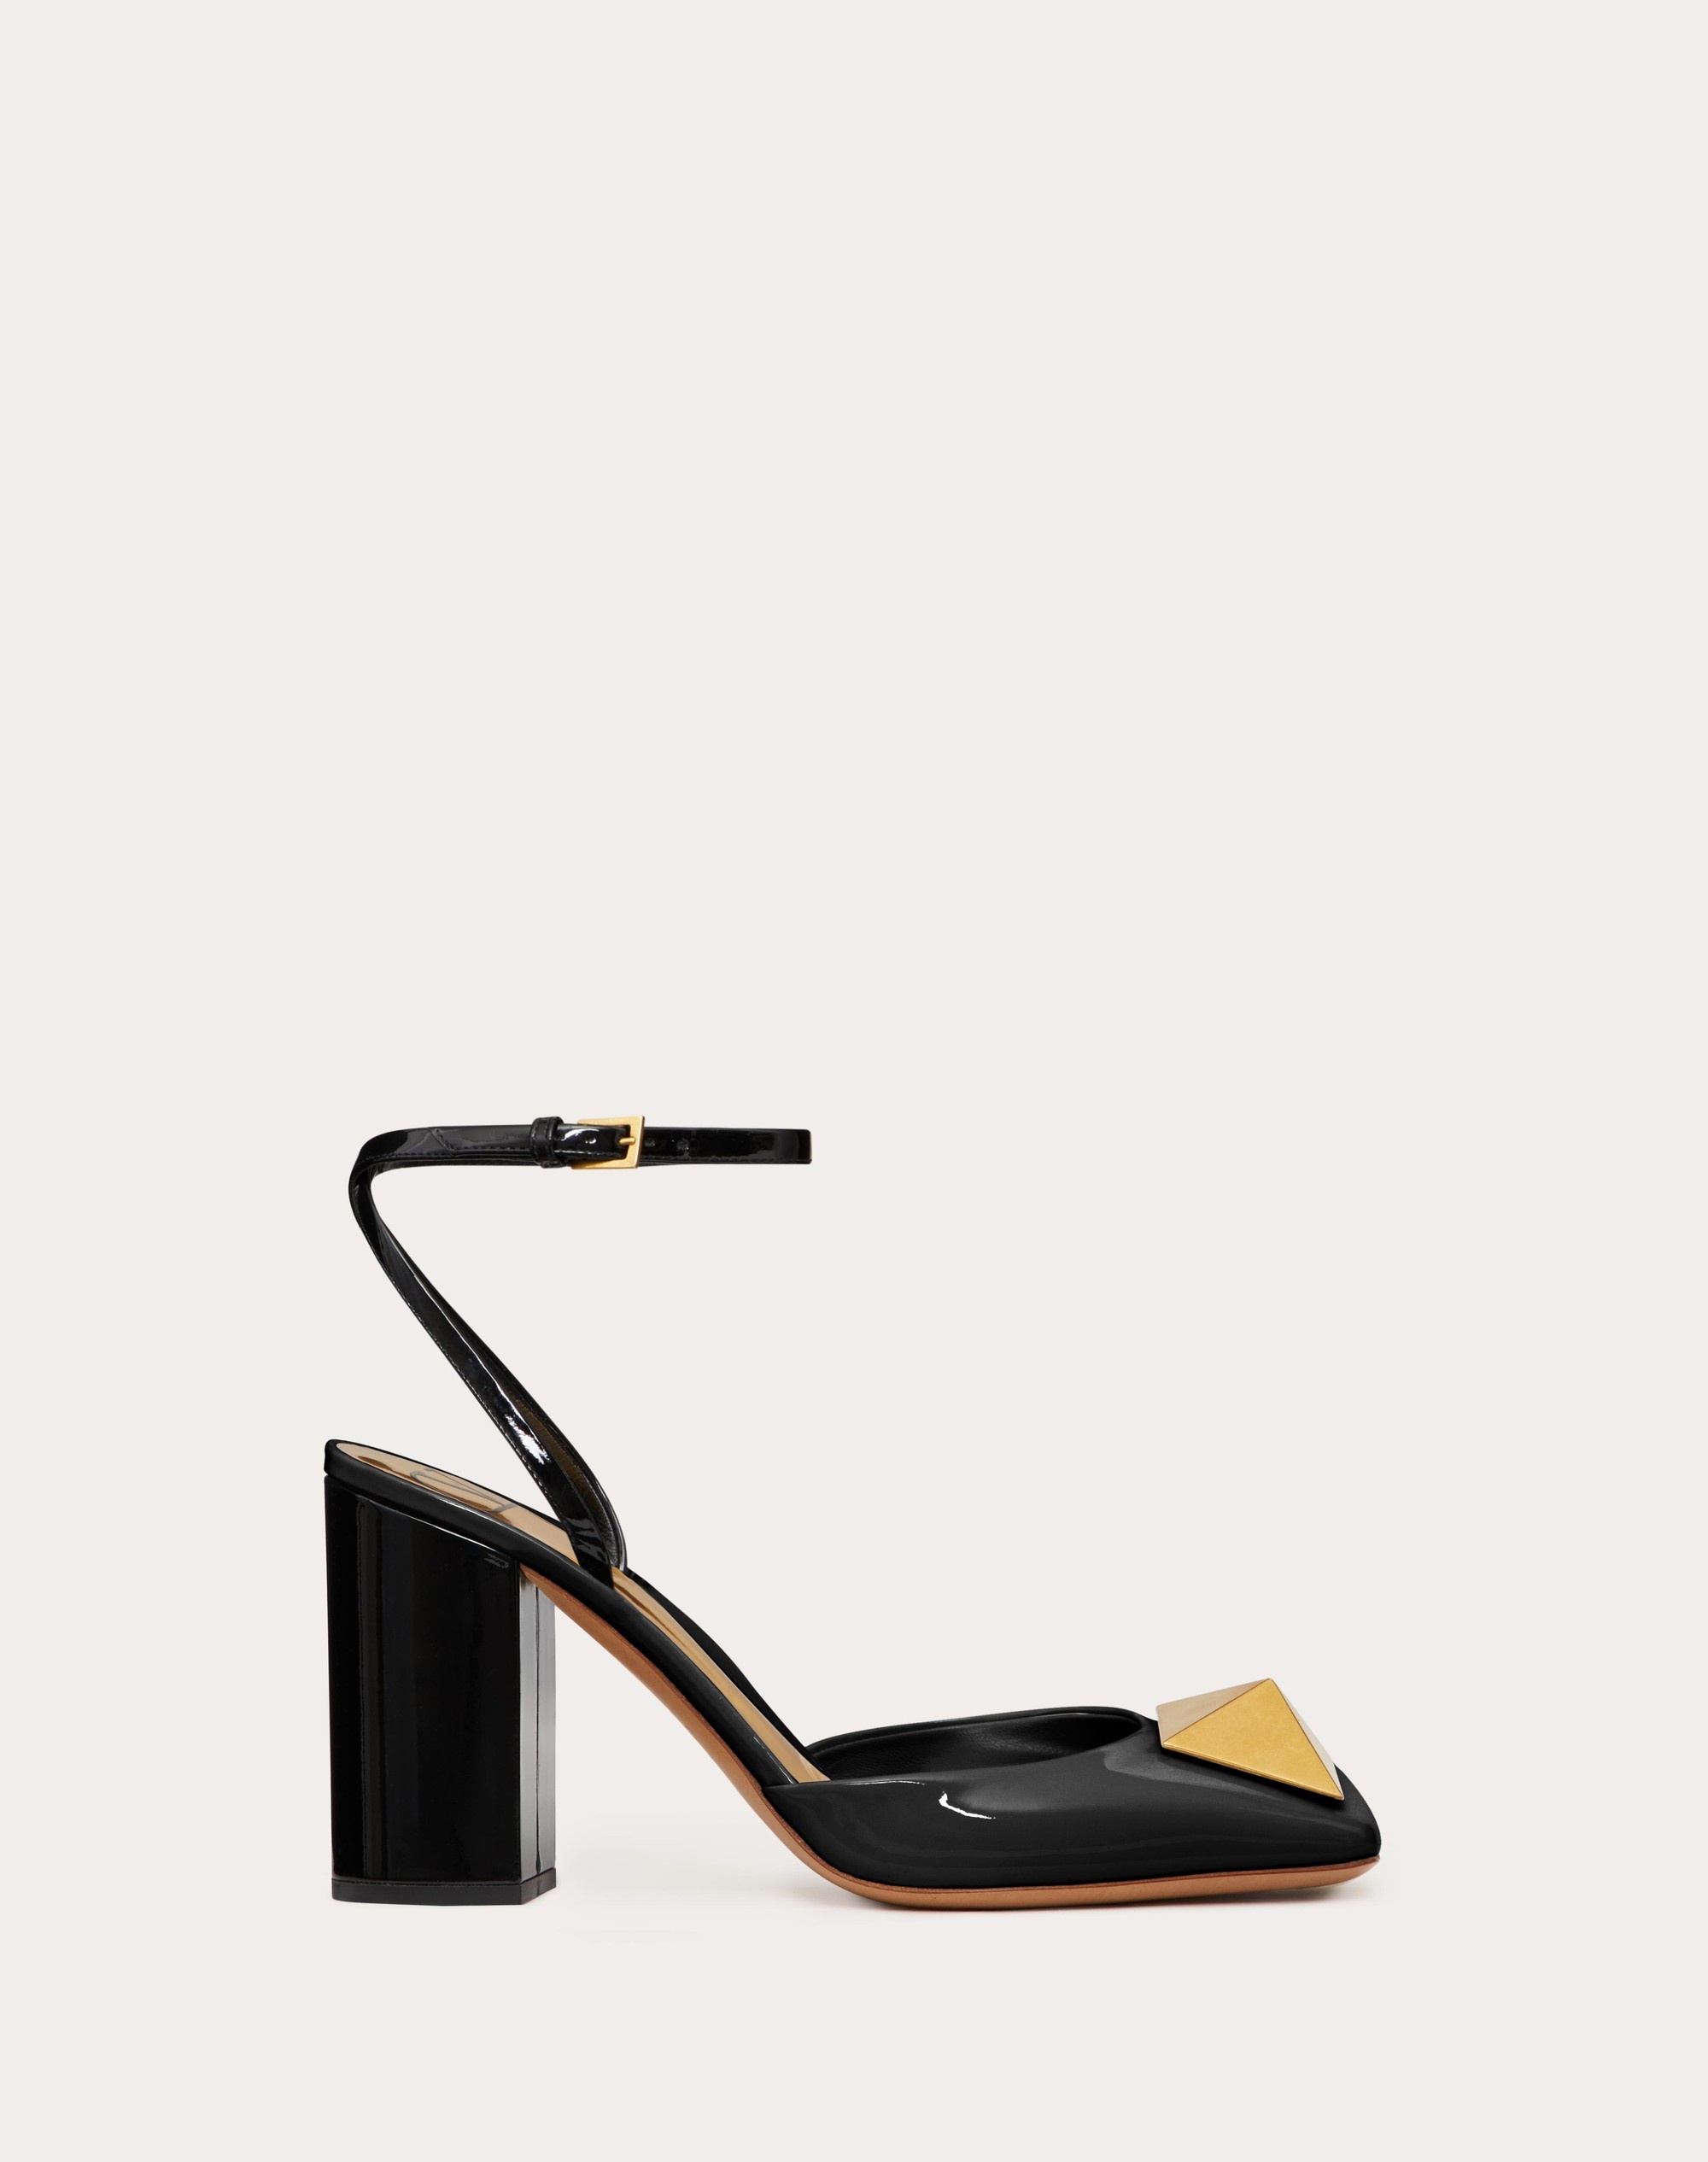 ONE STUD PUMP IN PATENT LEATHER 90MM - 1